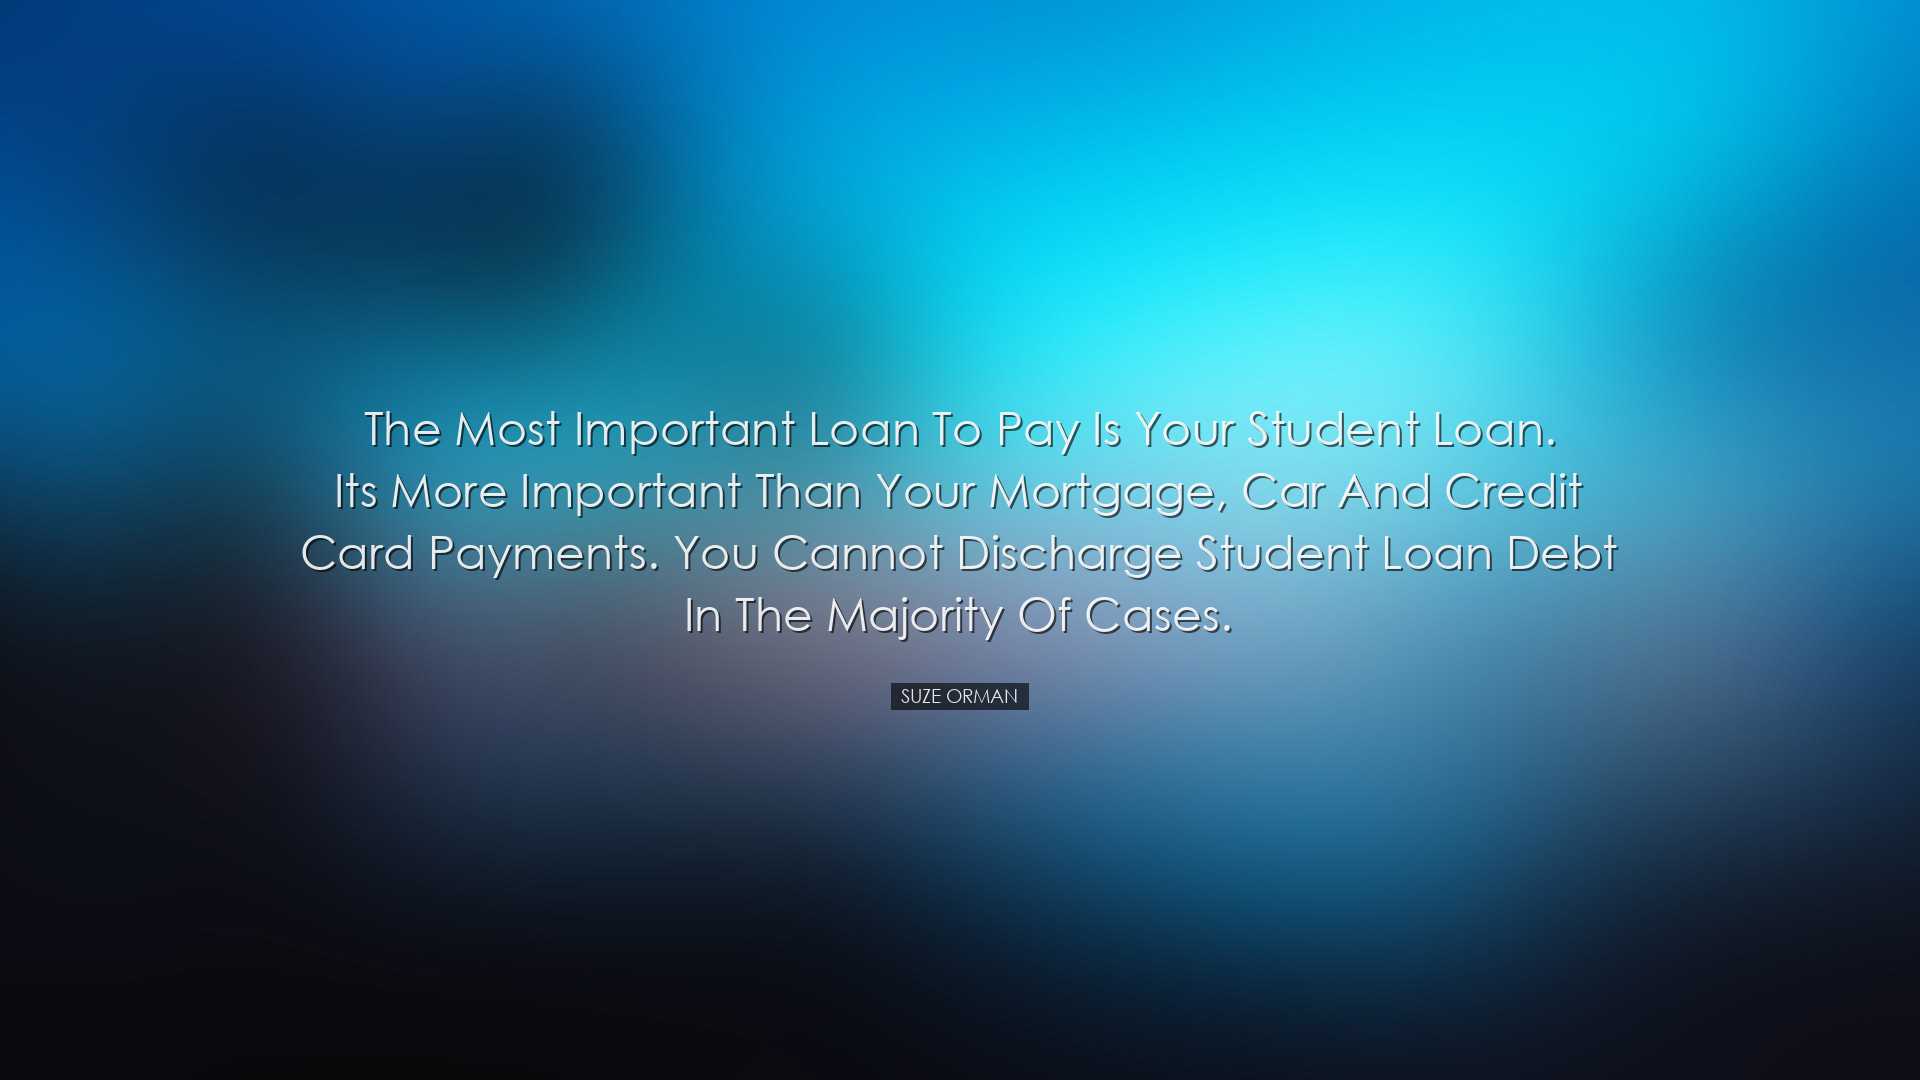 The most important loan to pay is your student loan. Its more impo